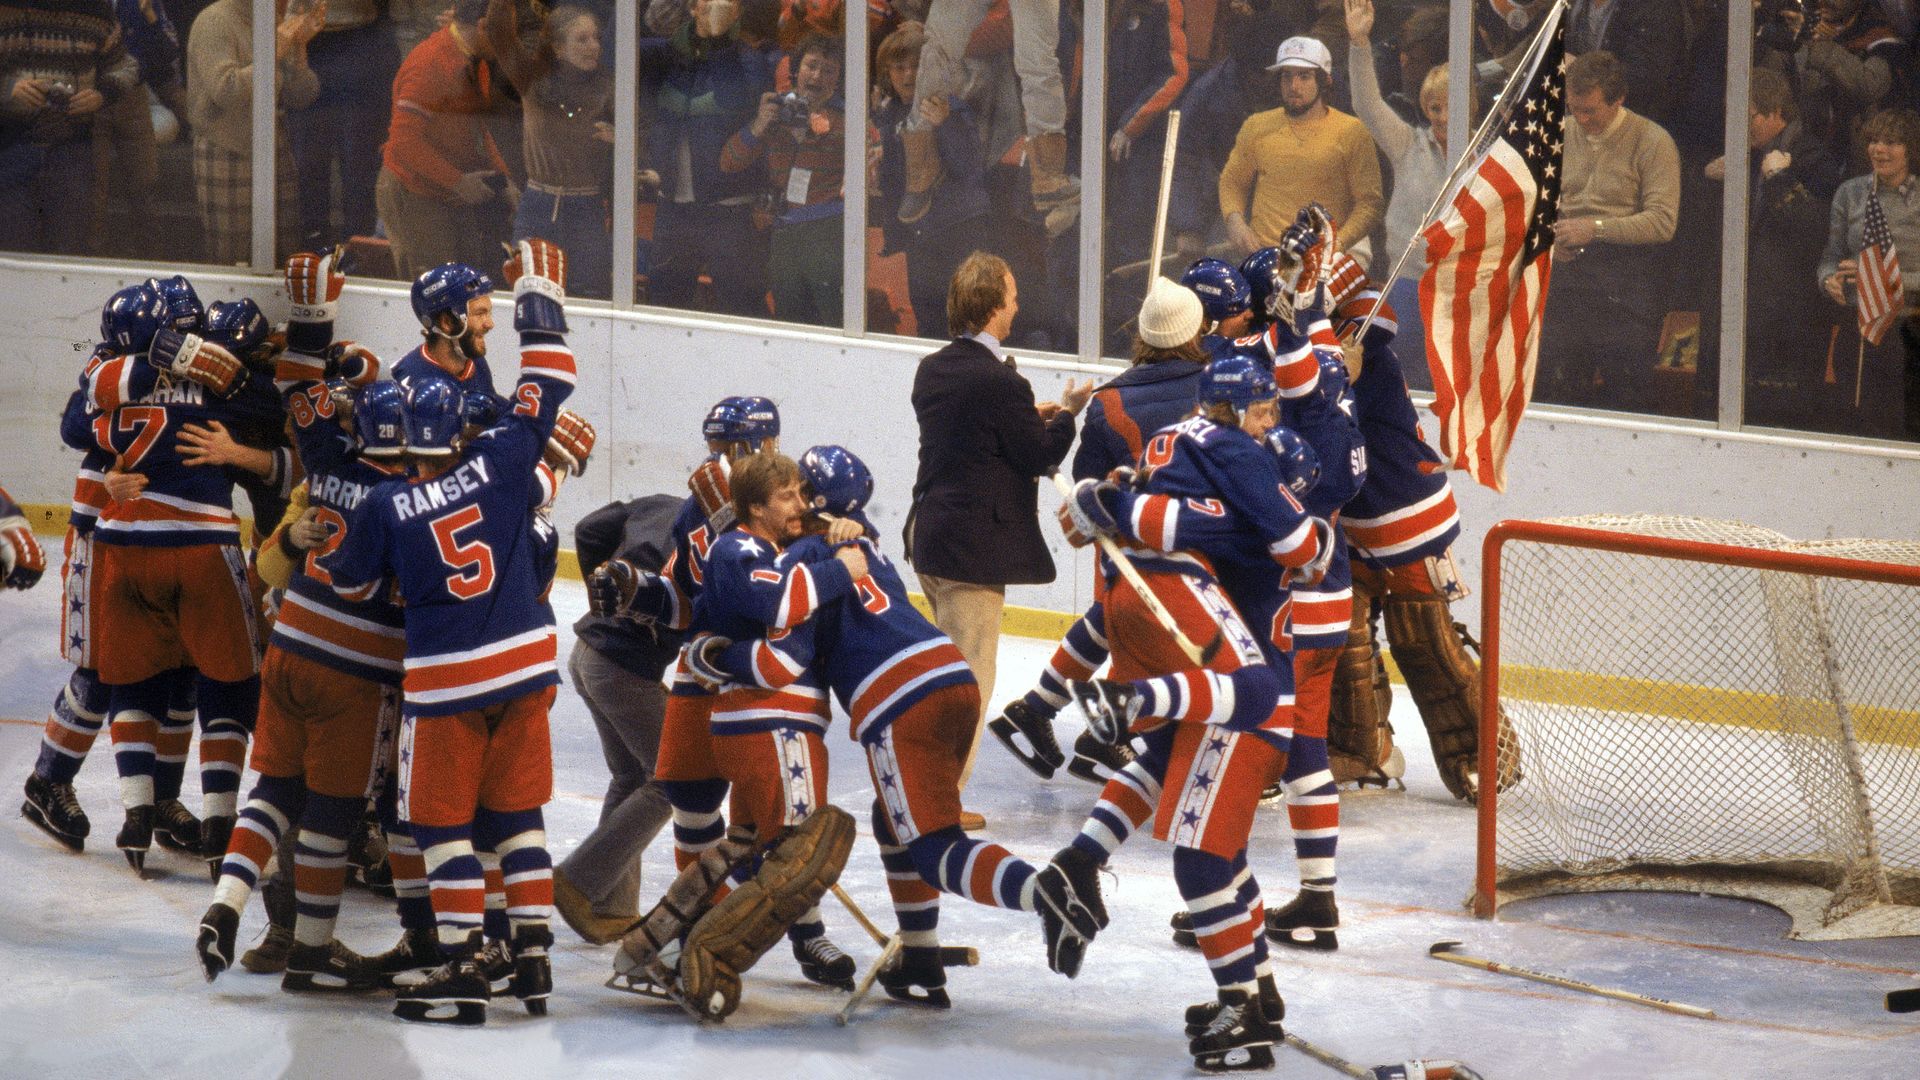 1980 olympics usa wins gold against Finland